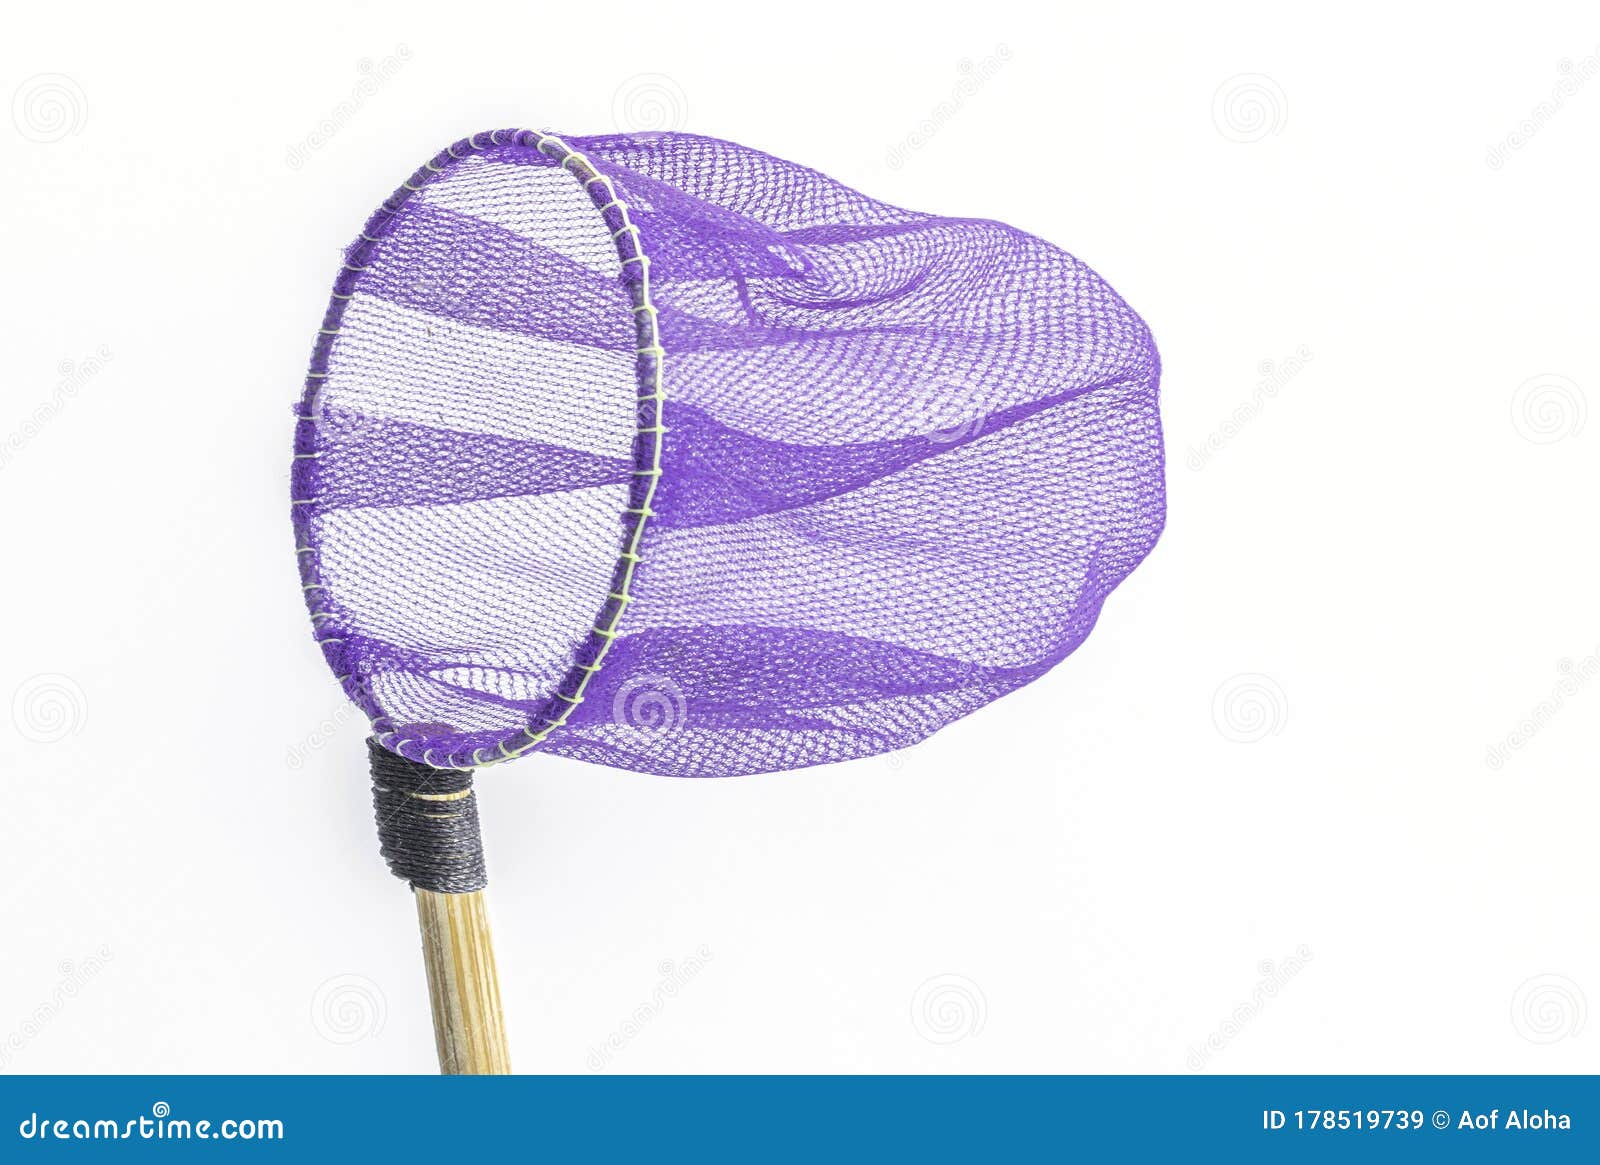 https://thumbs.dreamstime.com/z/purple-color-small-net-fishing-isolate-white-background-close-up-fish-net-scoop-circle-shape-purple-color-small-net-178519739.jpg